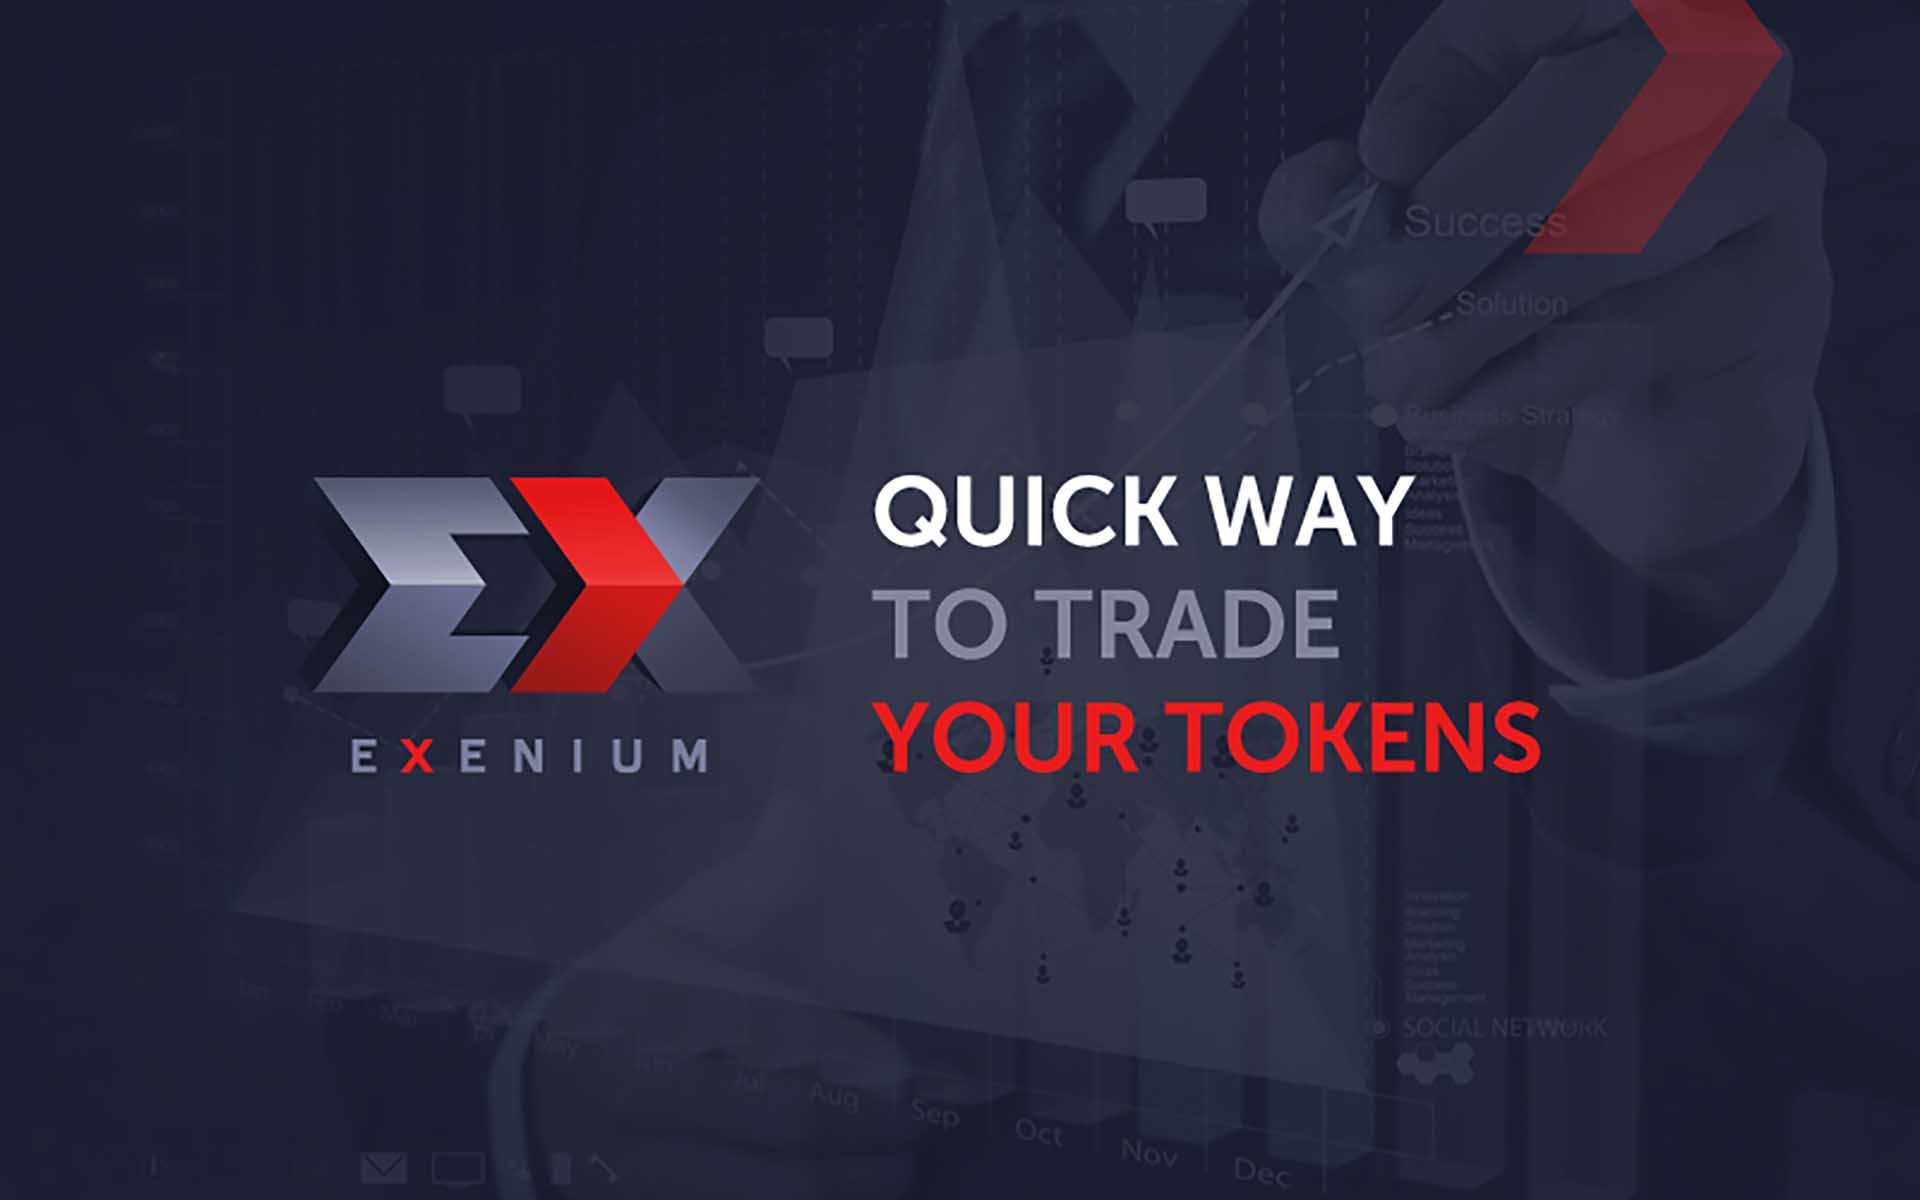 World’s First Chatbot Trading Platform for Cryptocurrency, Exenium Starts Initial Token Offering with Lucrative Bonus for Early Adopters